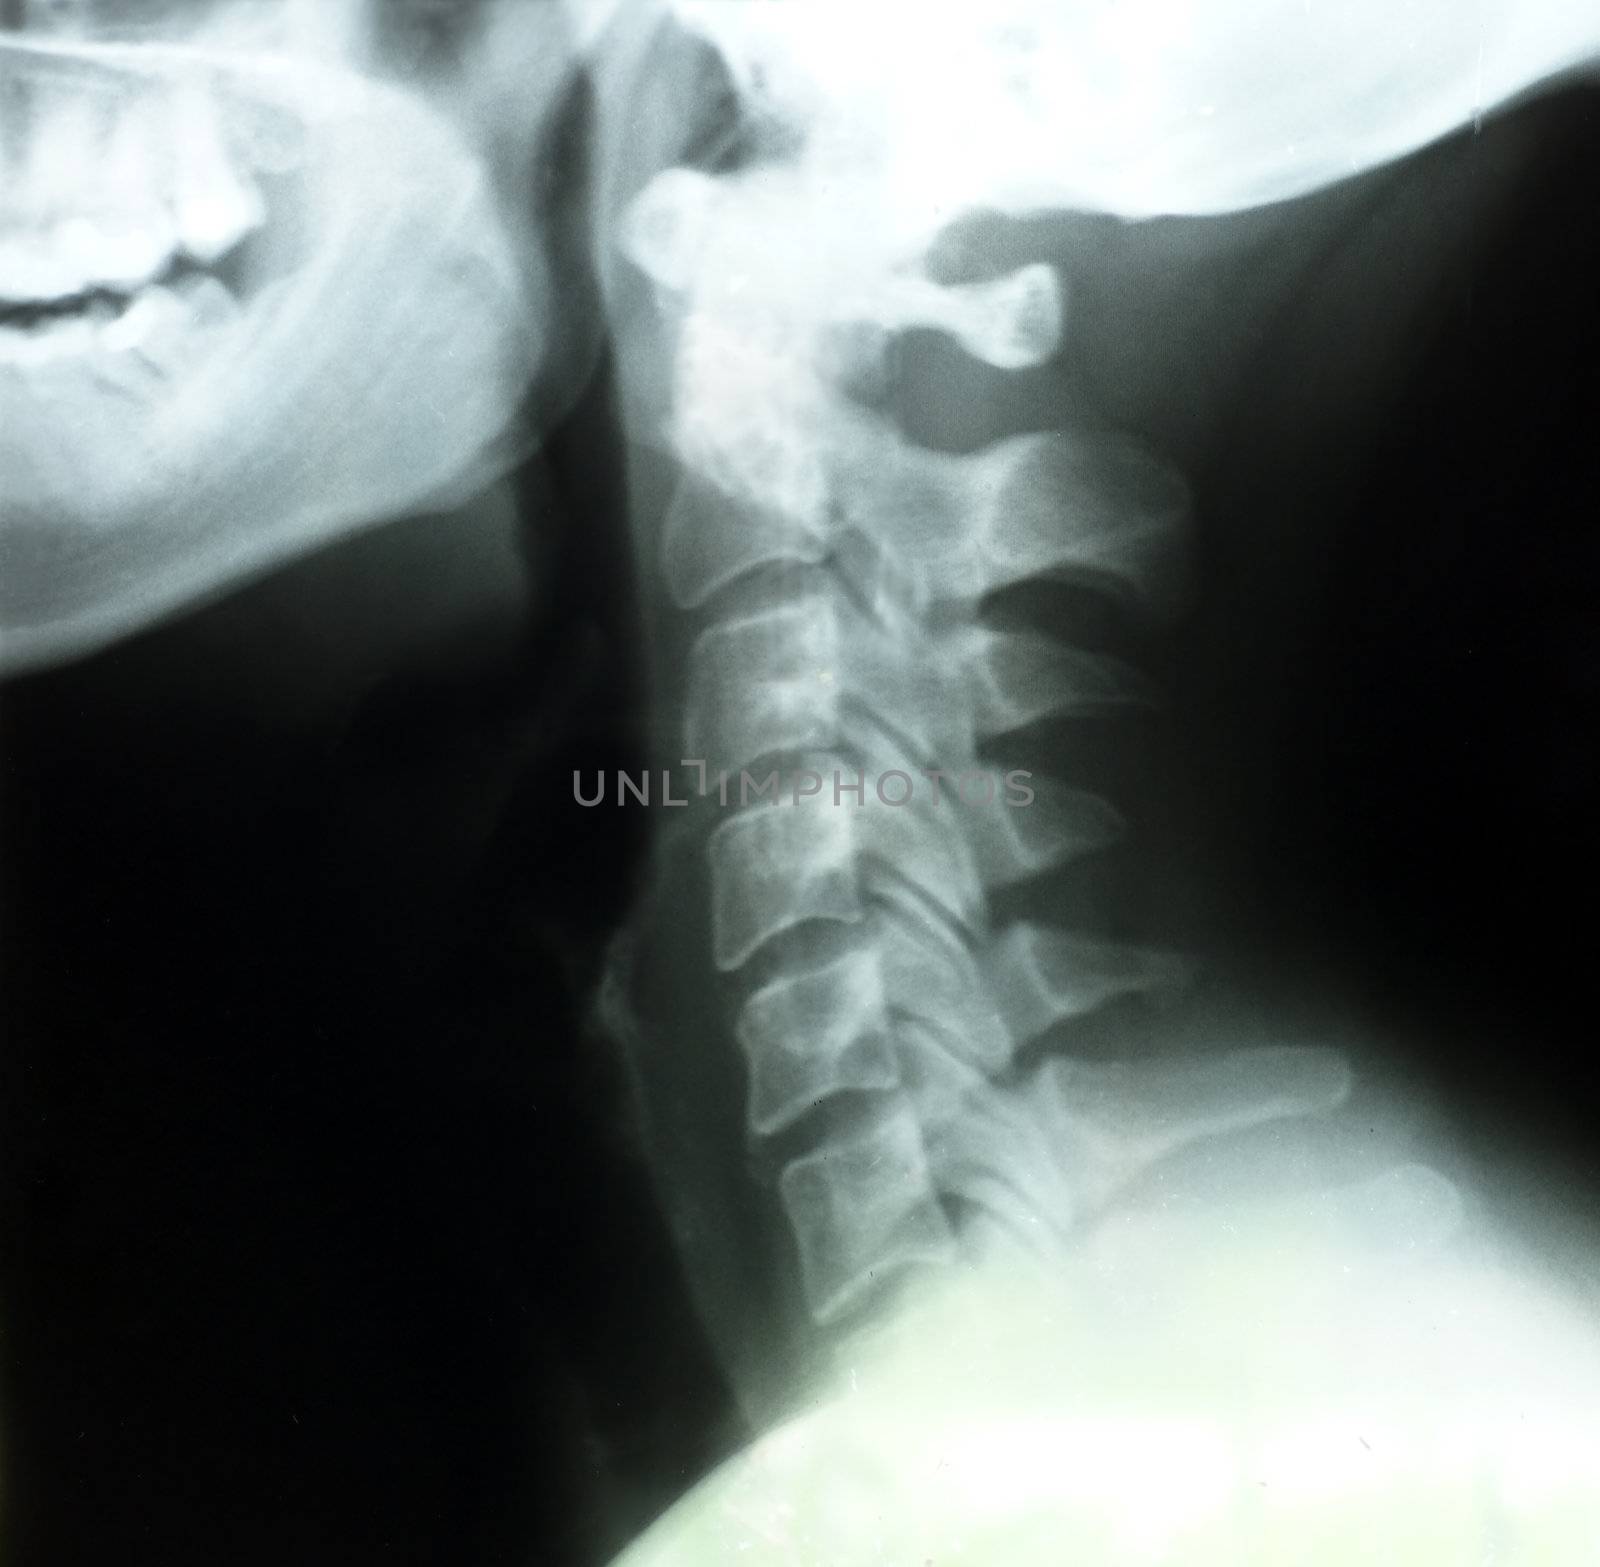 X-rays of woman's neck by Mirage3